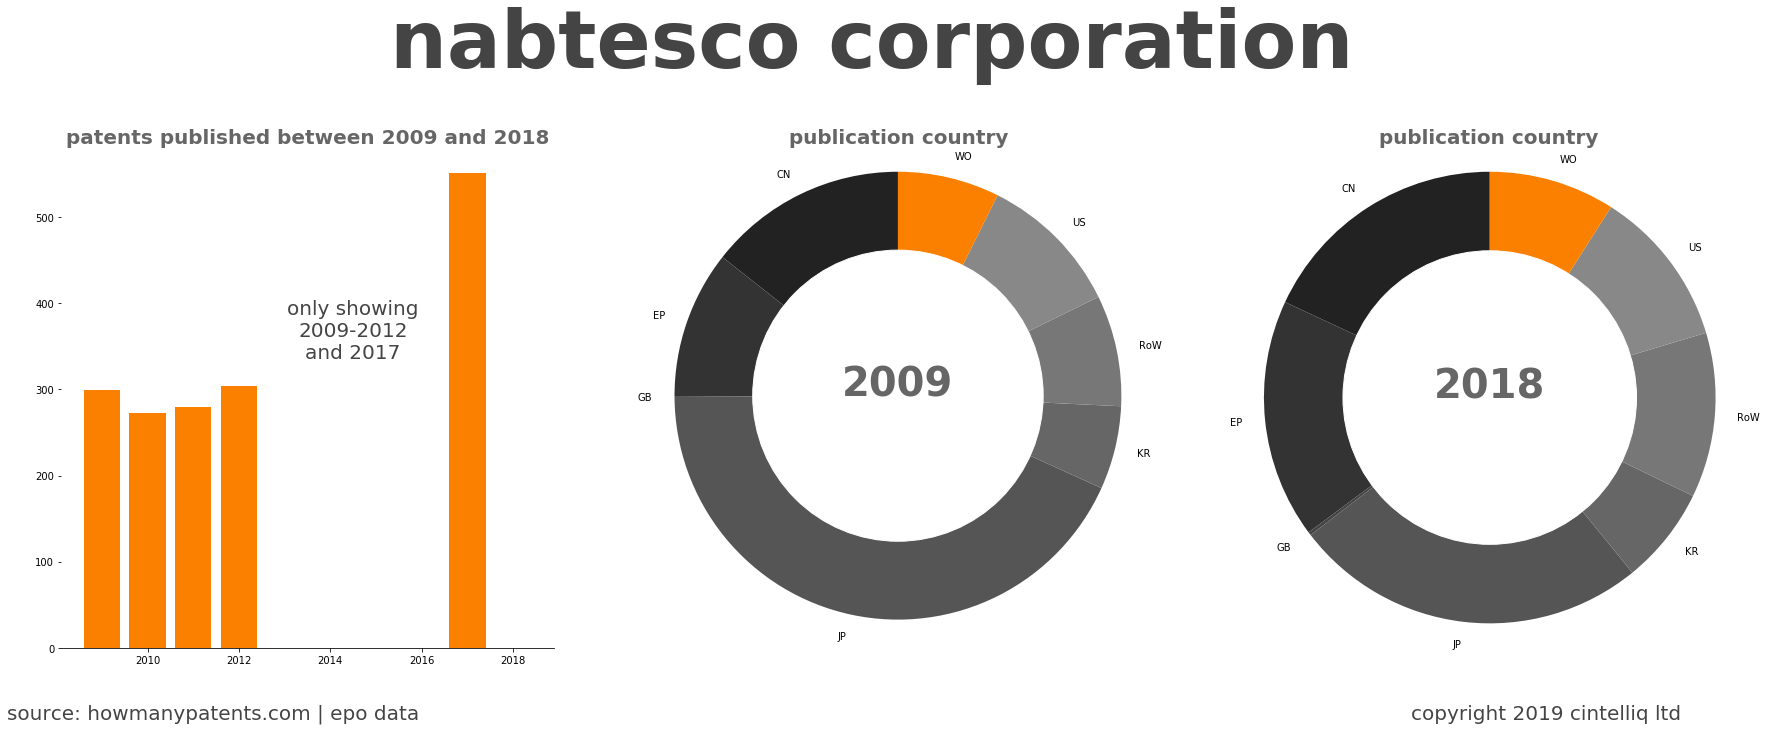 summary of patents for Nabtesco Corporation